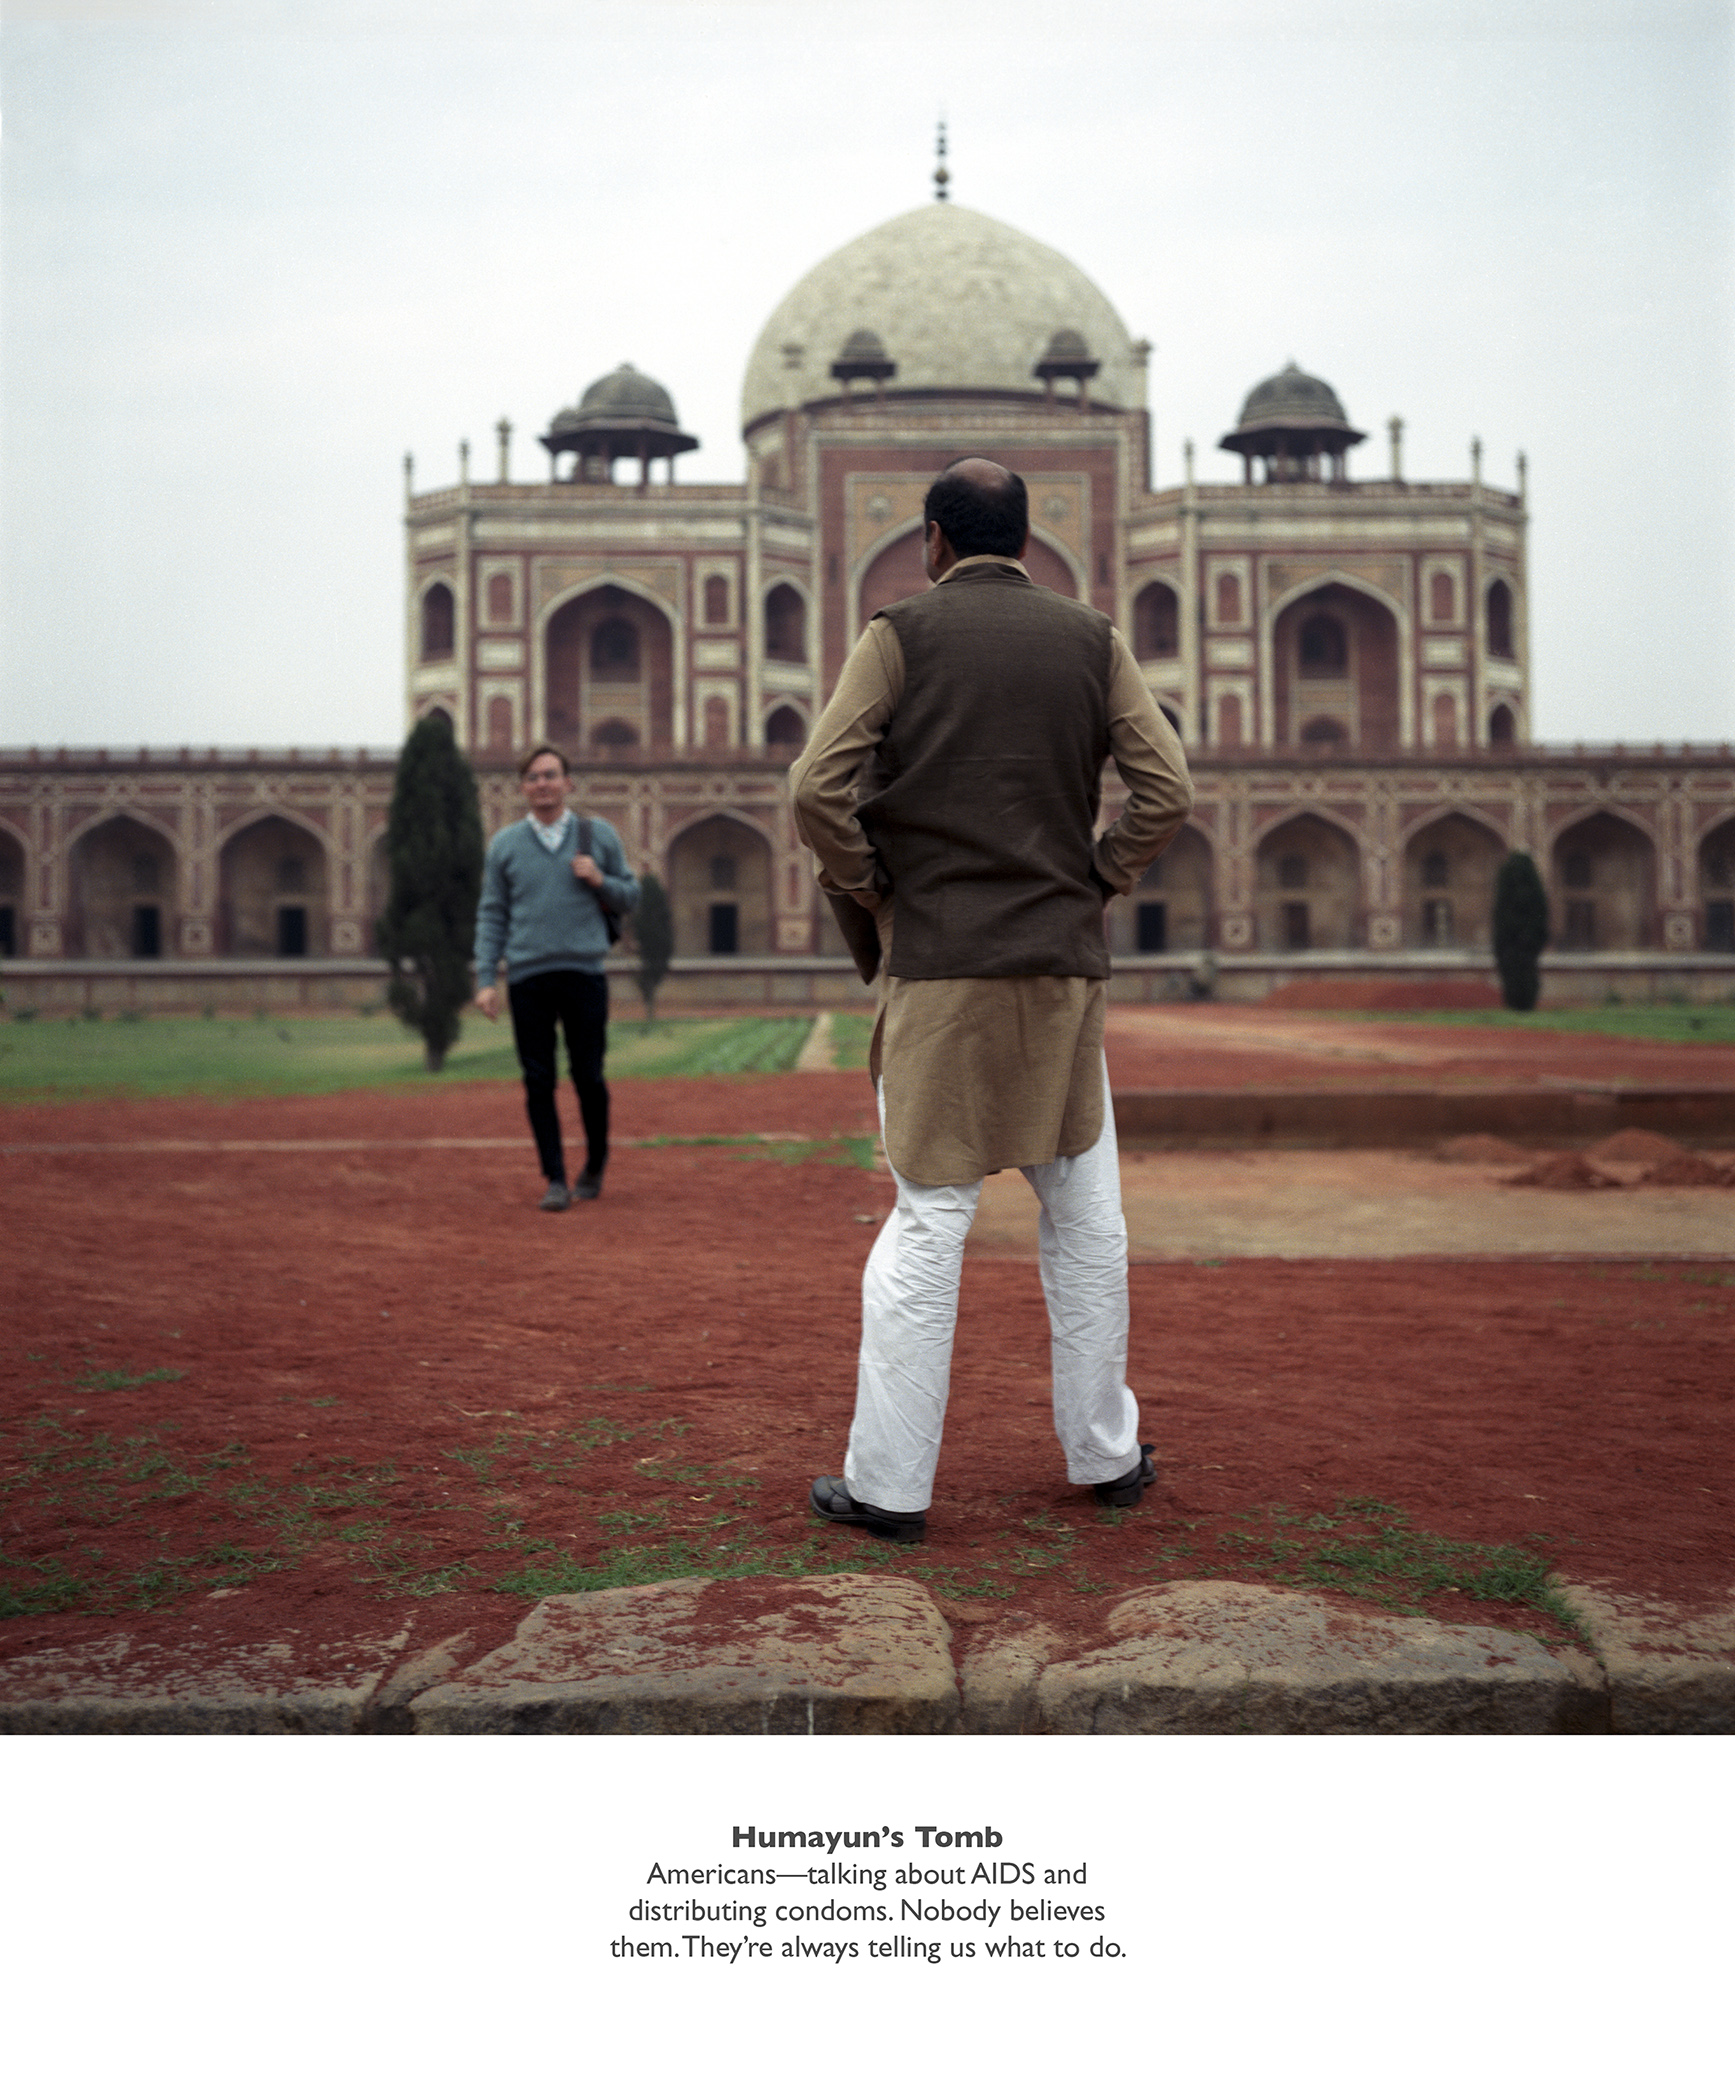 Sunil Gupta, Humayun's Tomb, from the series Exiles, 1987. Arts Council Collection, Southbank Centre, London © the artist.